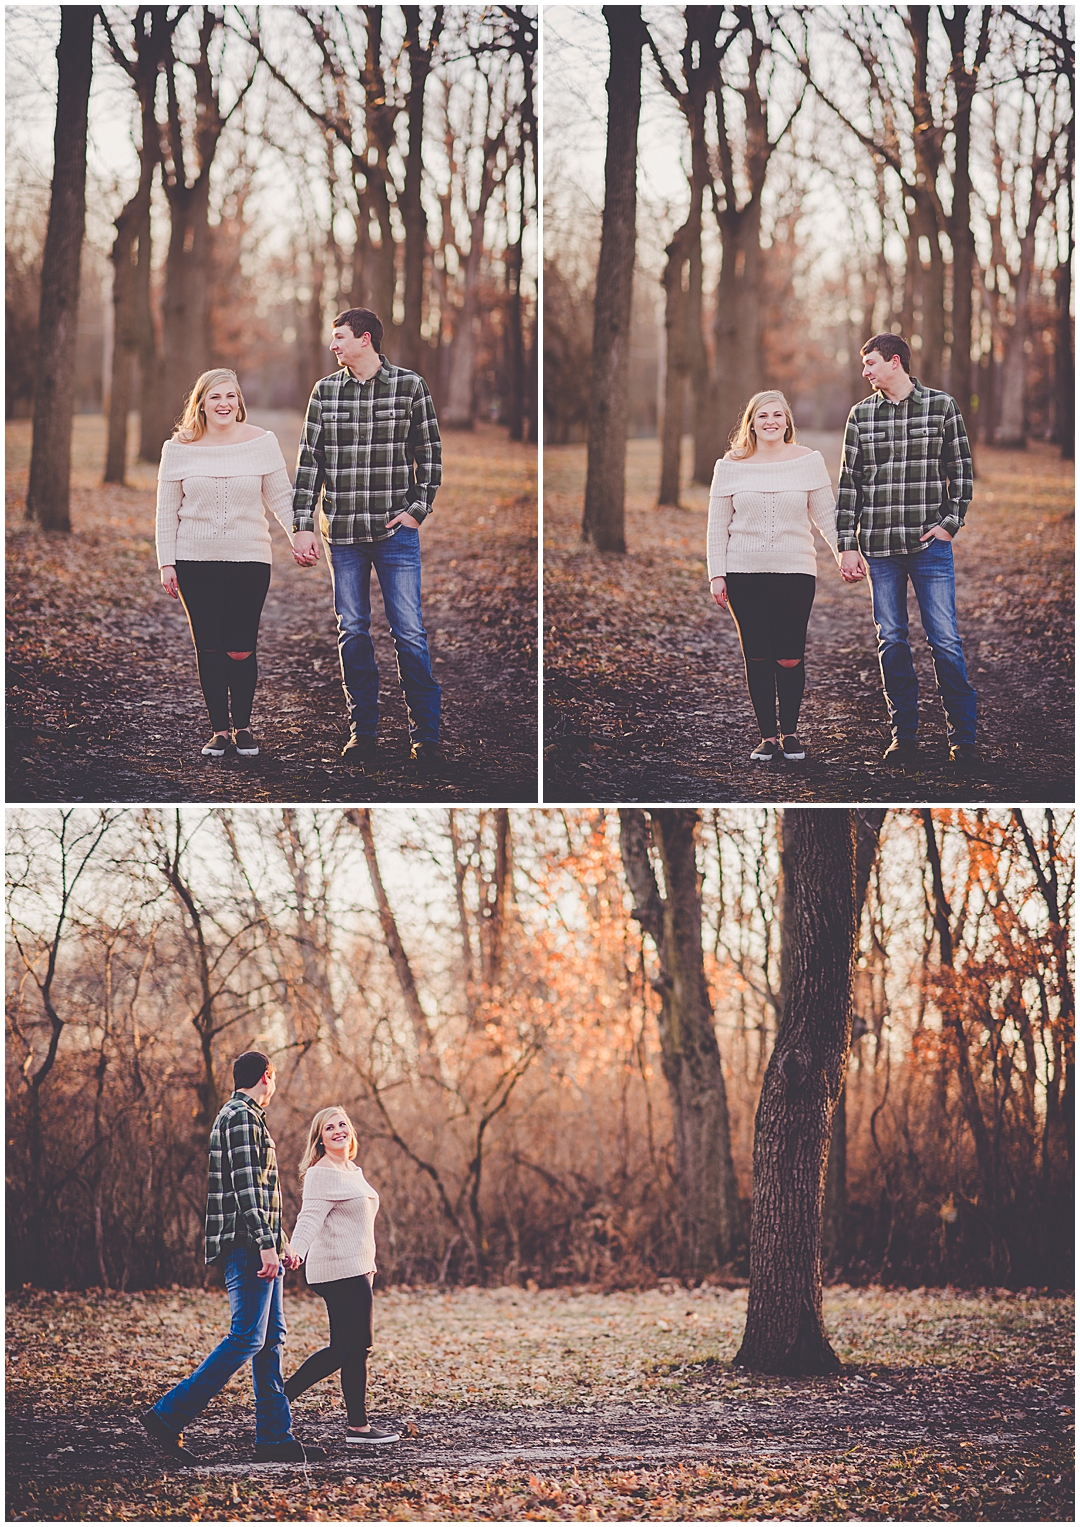 Lincoln Memorial Garden winter engagement photos in Springfield Illinois - Kara Evans Photographer Central Illinois and Chicagoland engagement photographer.